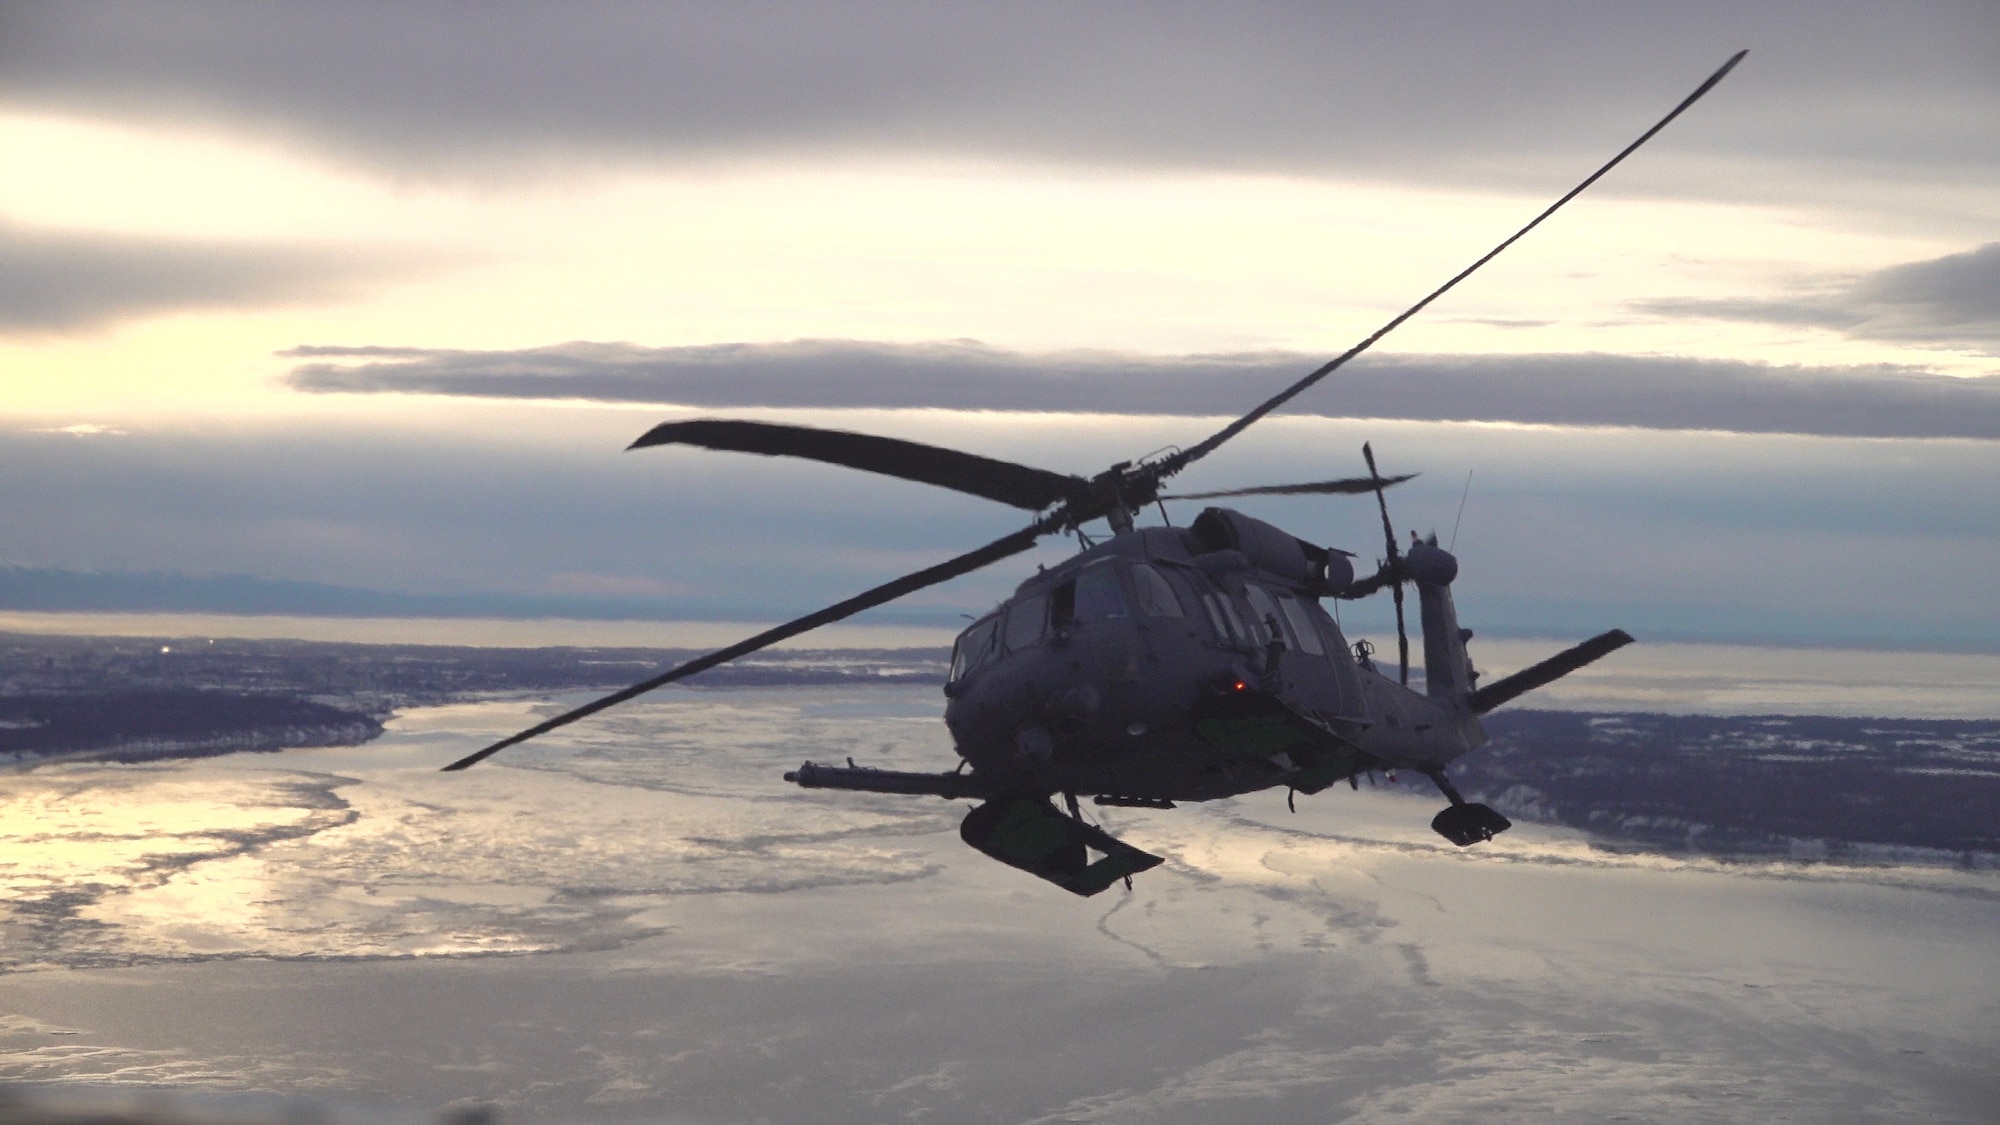 Members of the 210th and 211th Rescue Squadrons, Alaska National Guard, practice aerial refueling in an HH-60G Pave Hawk helicopter over Alaska Jan. 21, 2021.